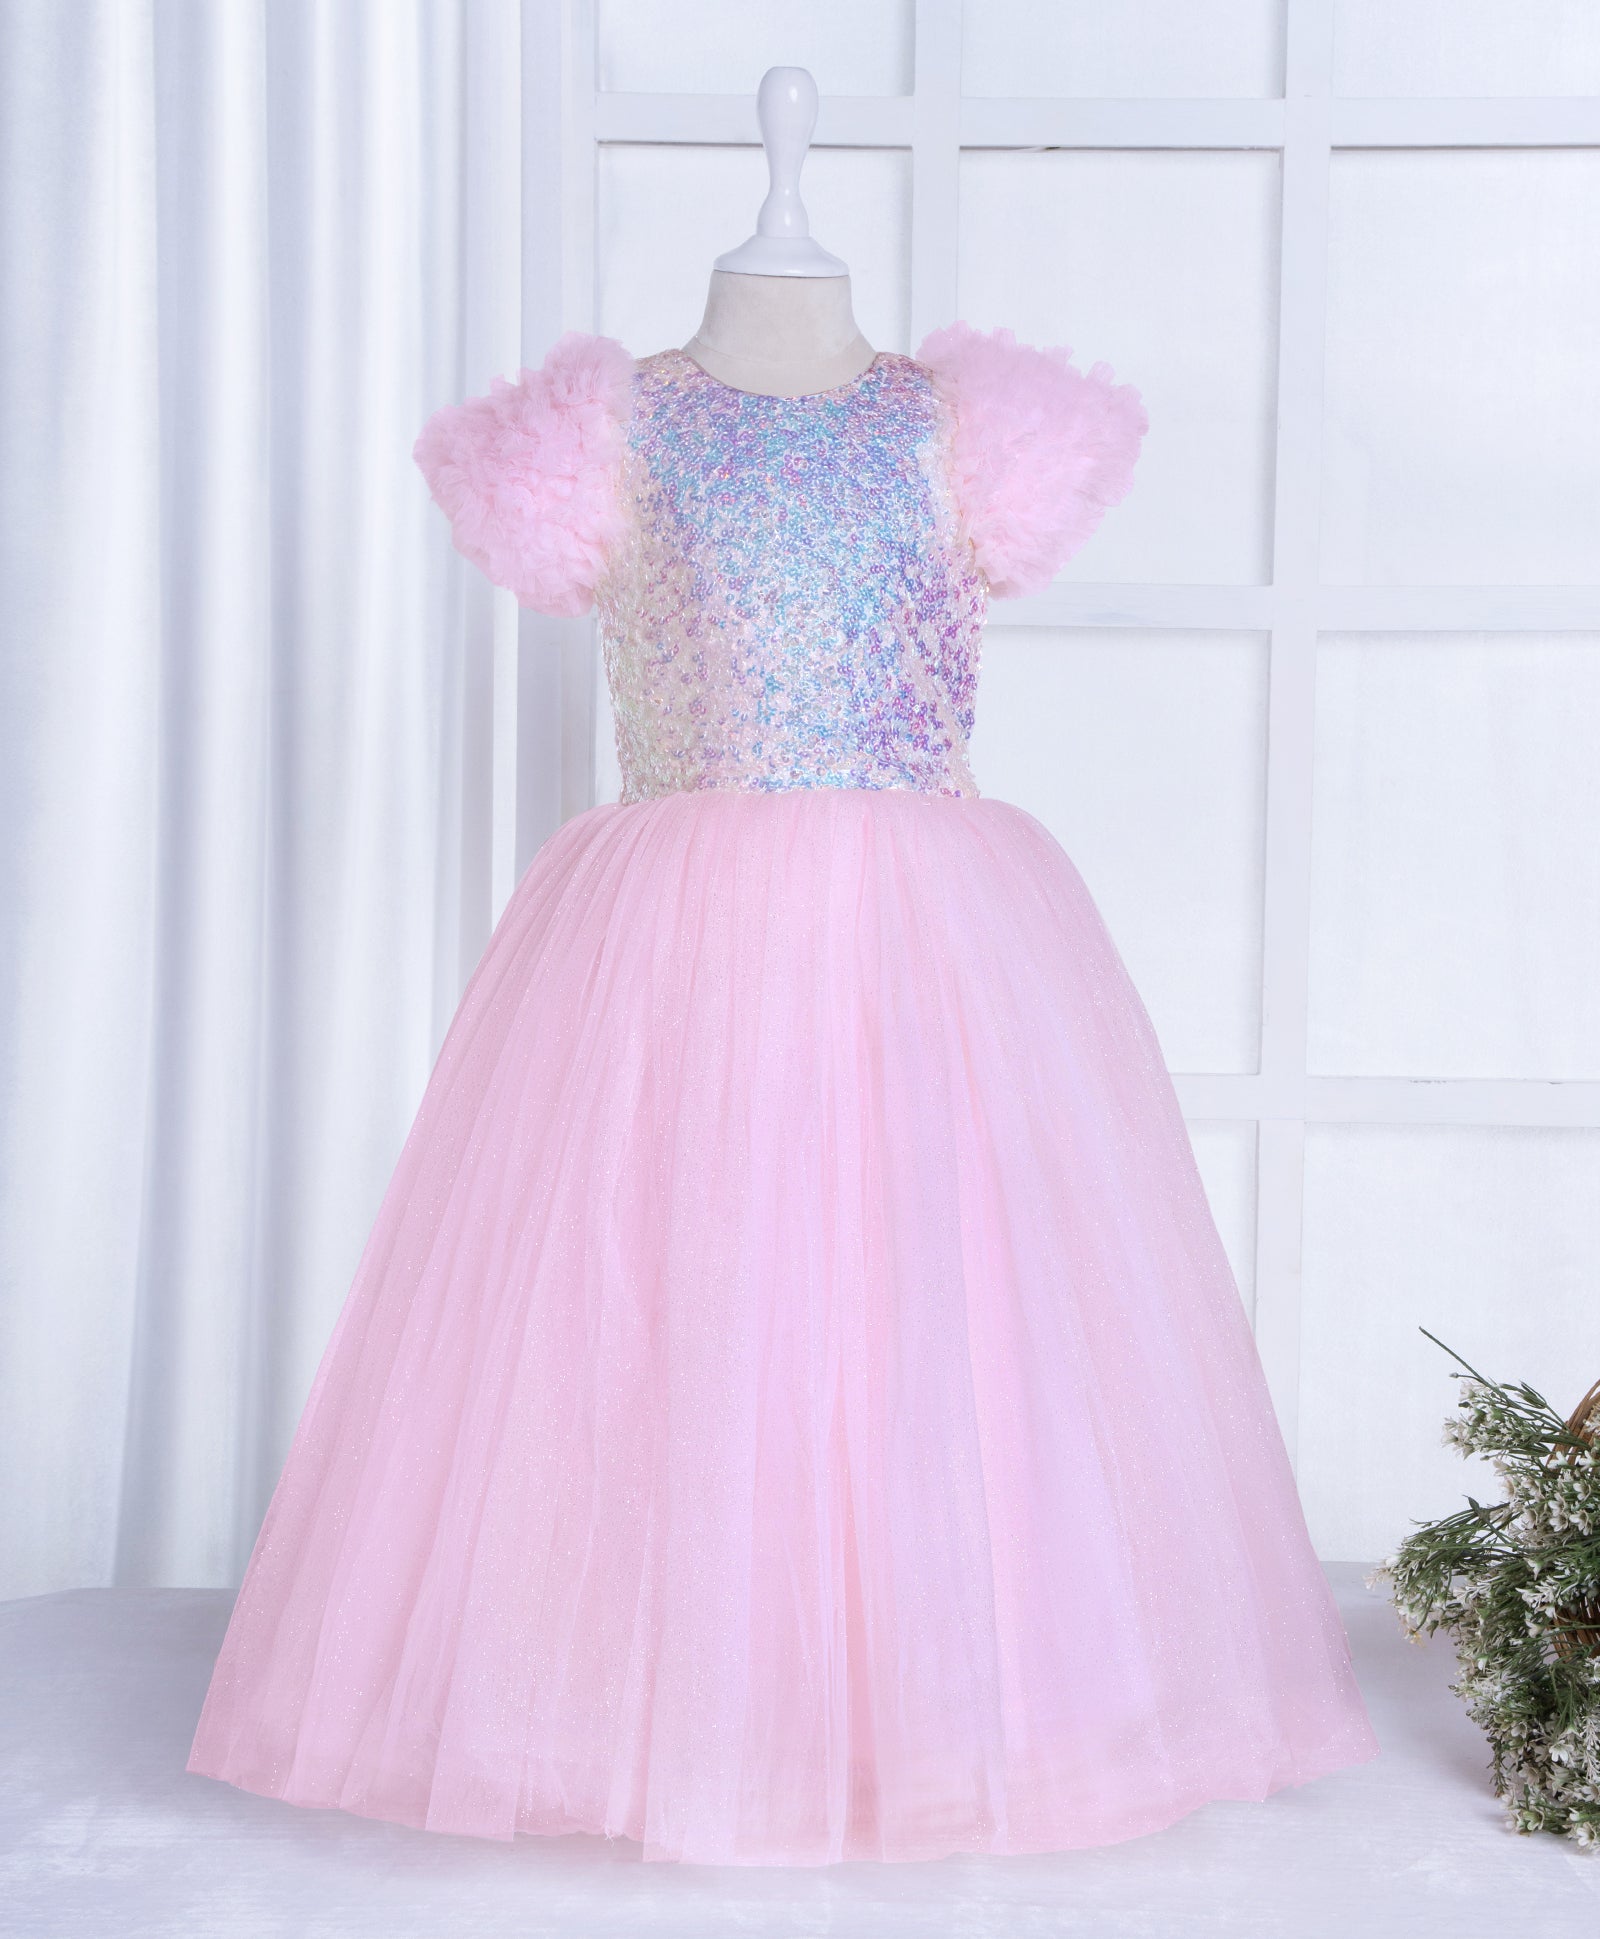 Princess of the Party Ball Gown Costume | Melonhopper.com